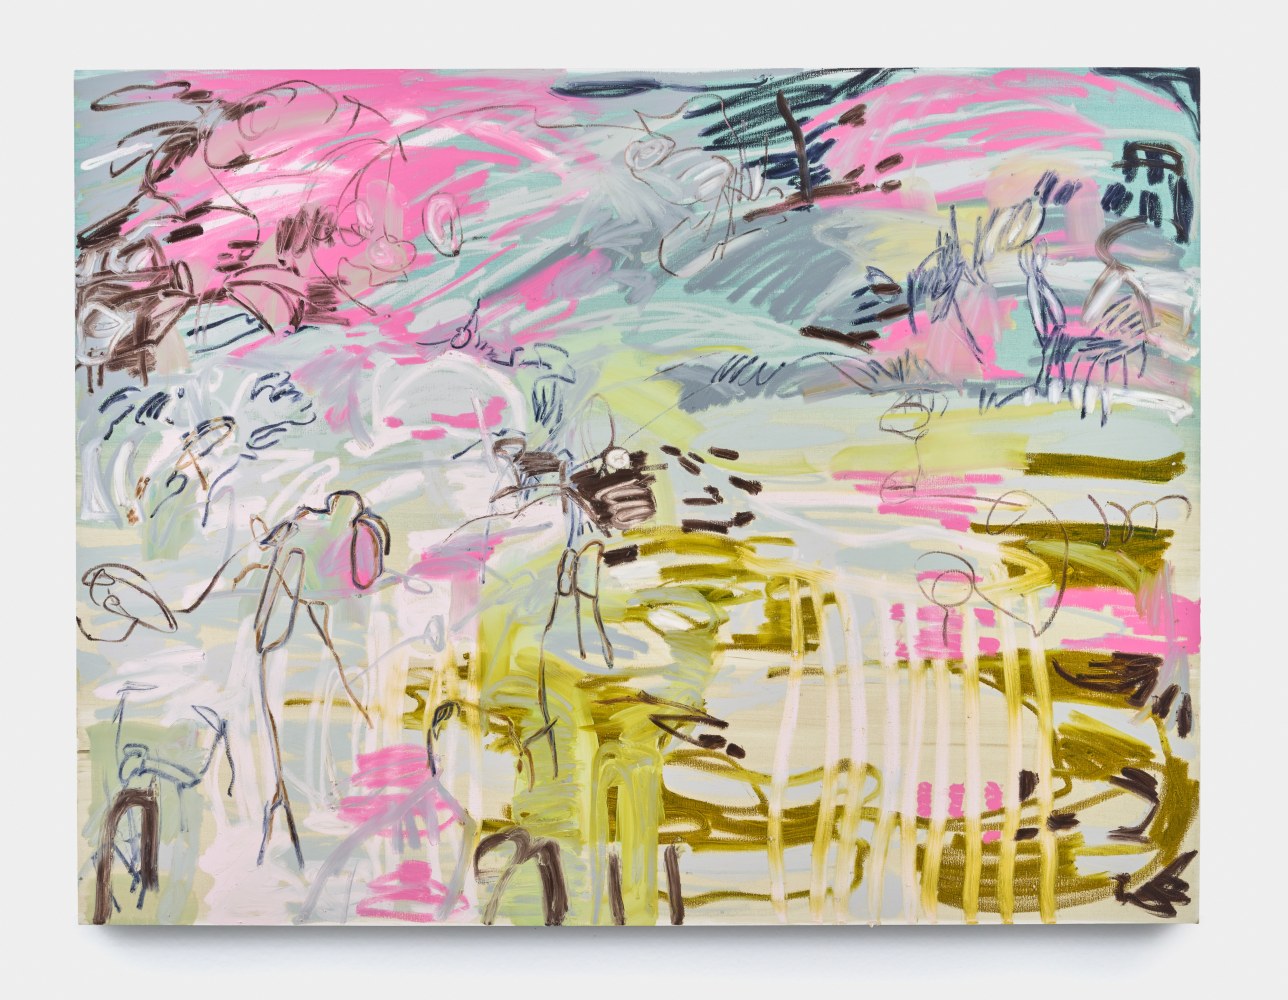 An abstract painting in pinks, blues and yellowy greens with figure like line drawings.